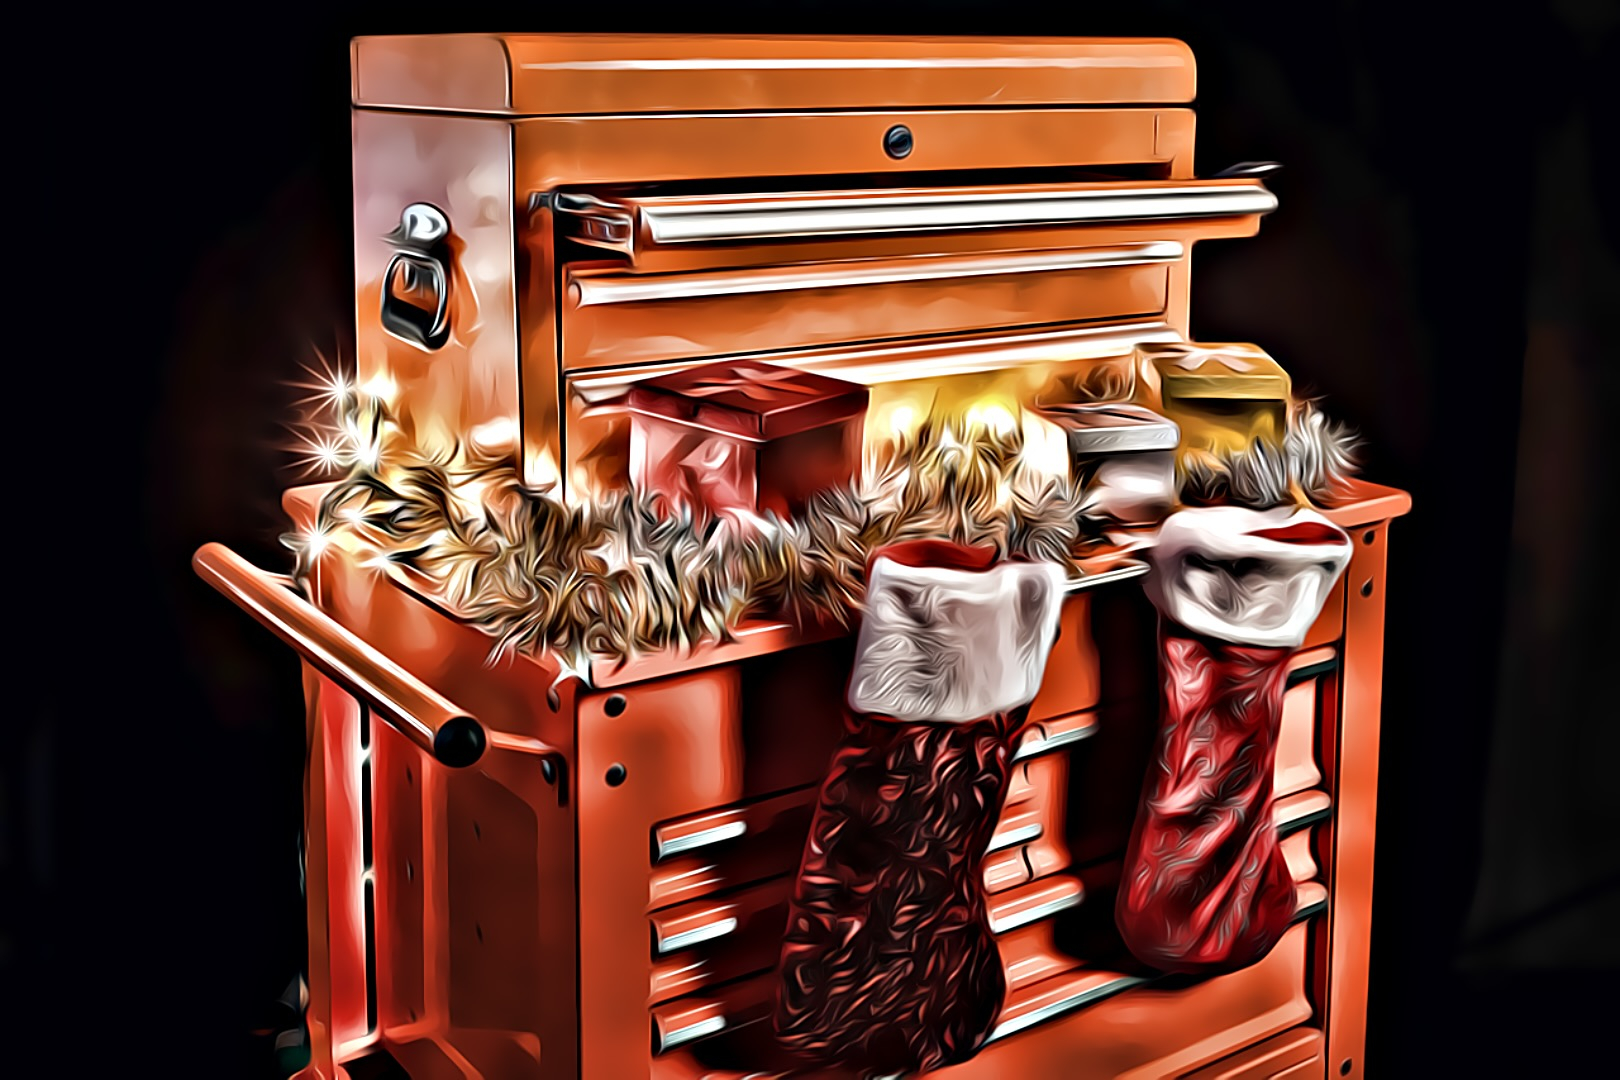 Christmas gifts on a toolbox.